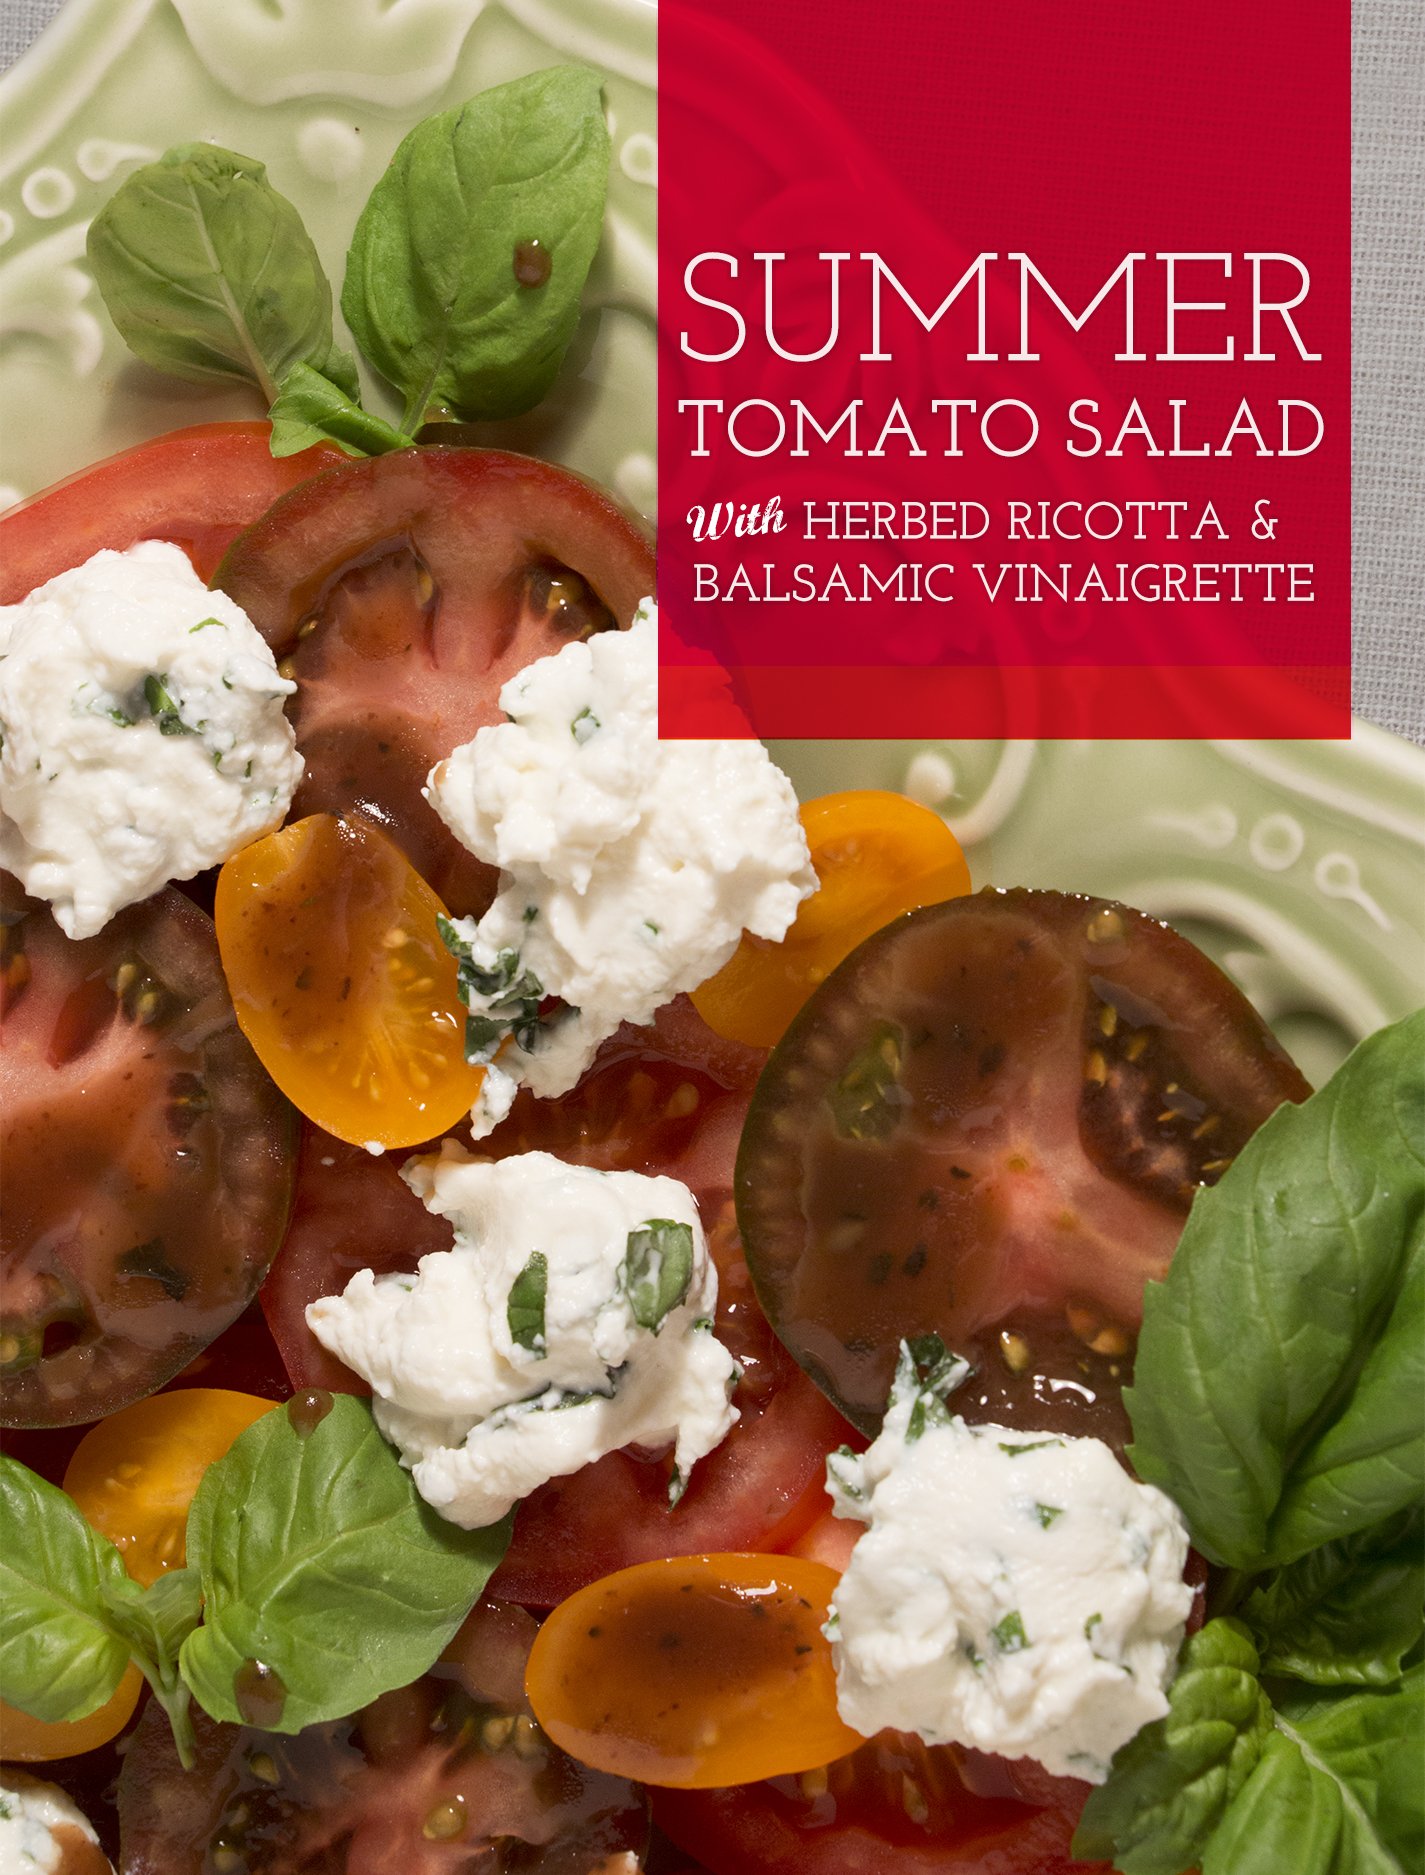 Tomato Salad with Herbed Ricotta